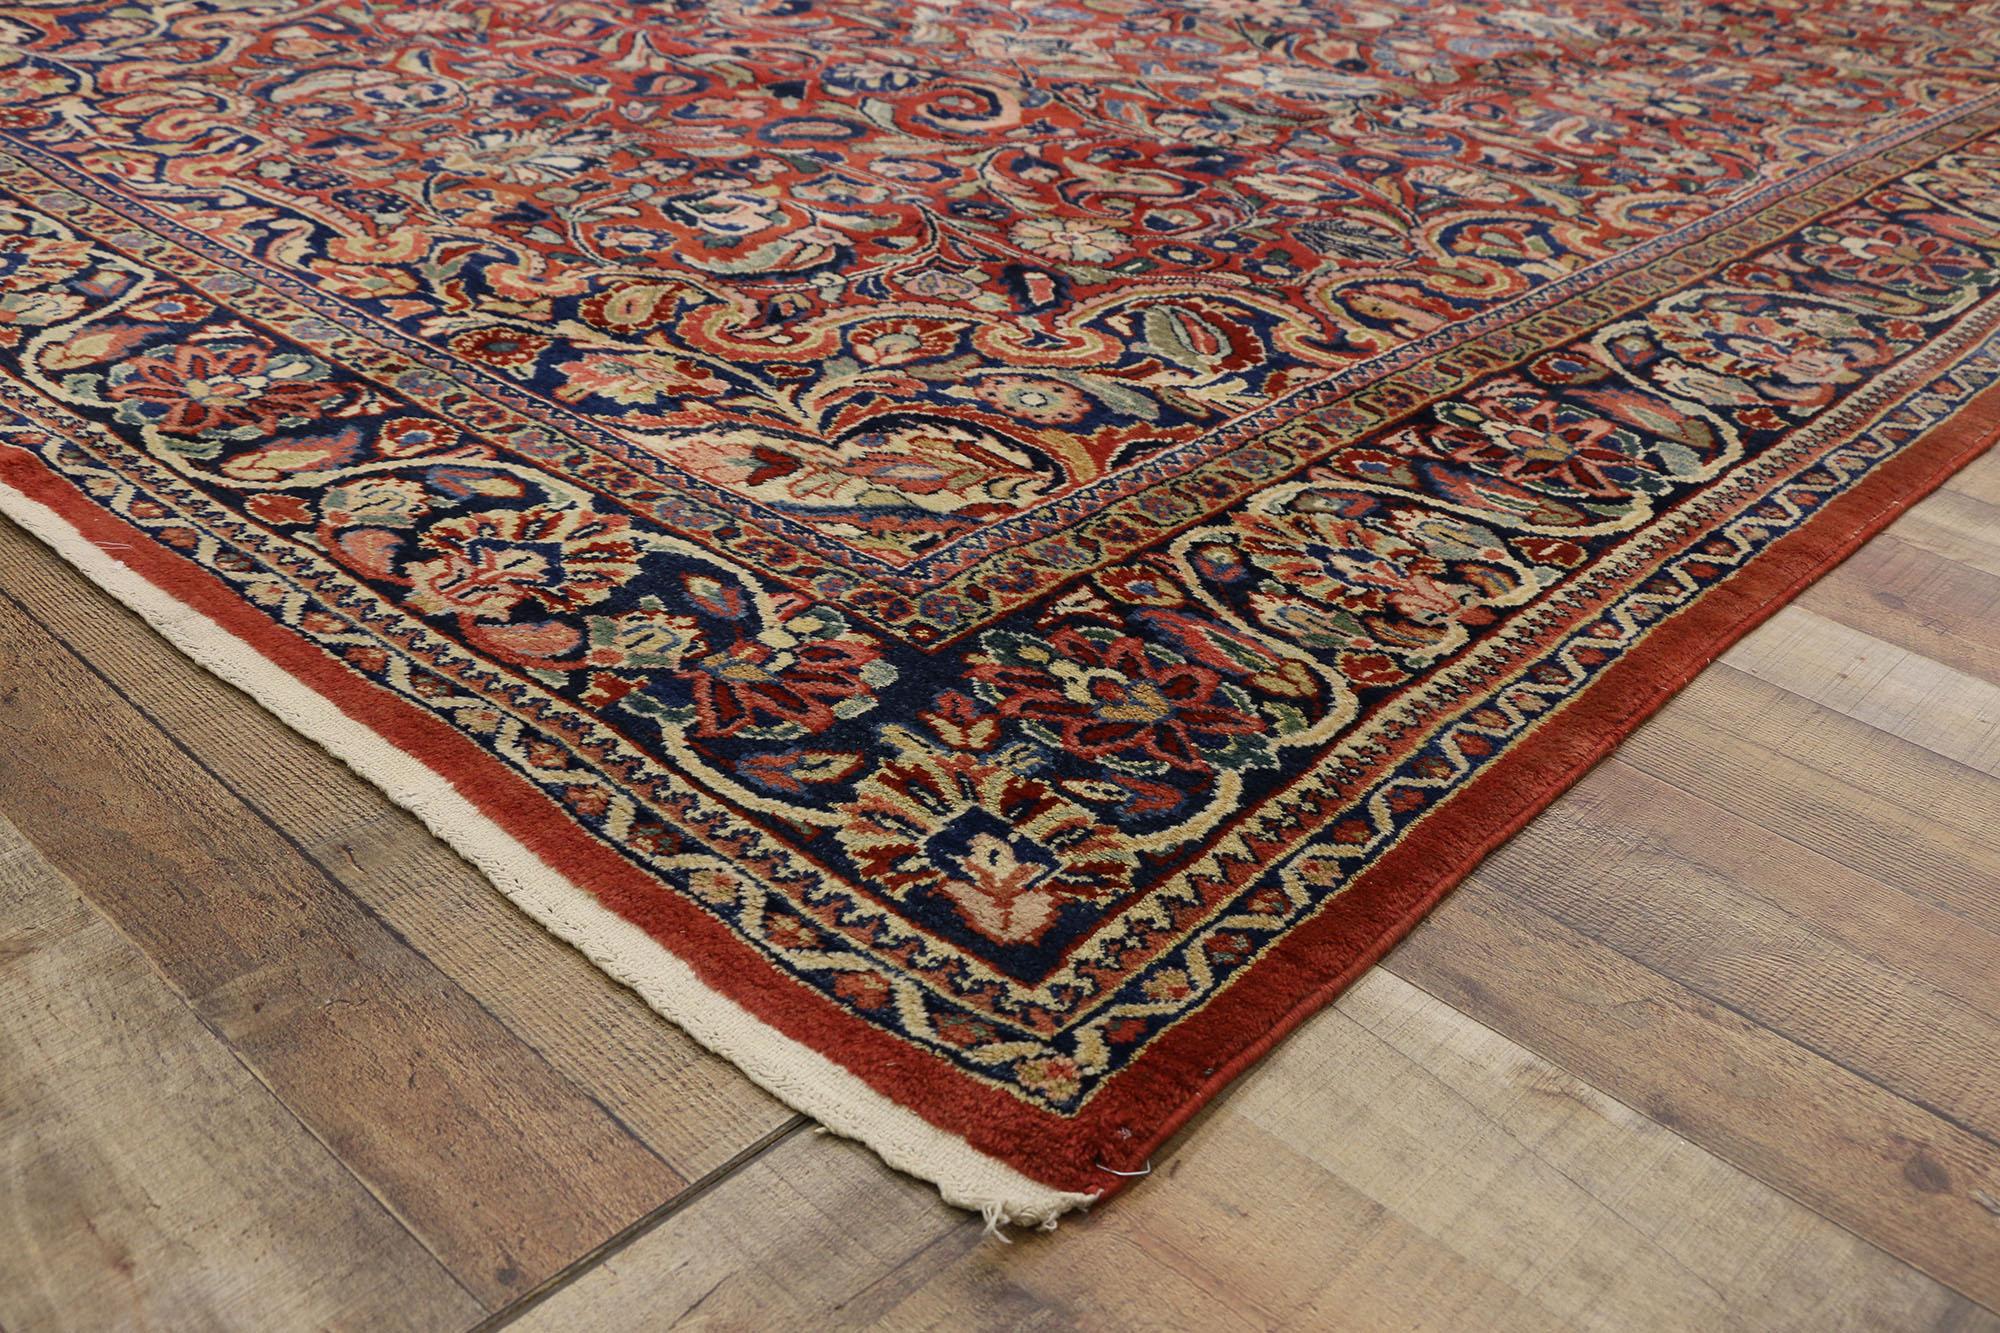 Antique Persian Mahal Area Rug with Modern Federal Style In Good Condition For Sale In Dallas, TX